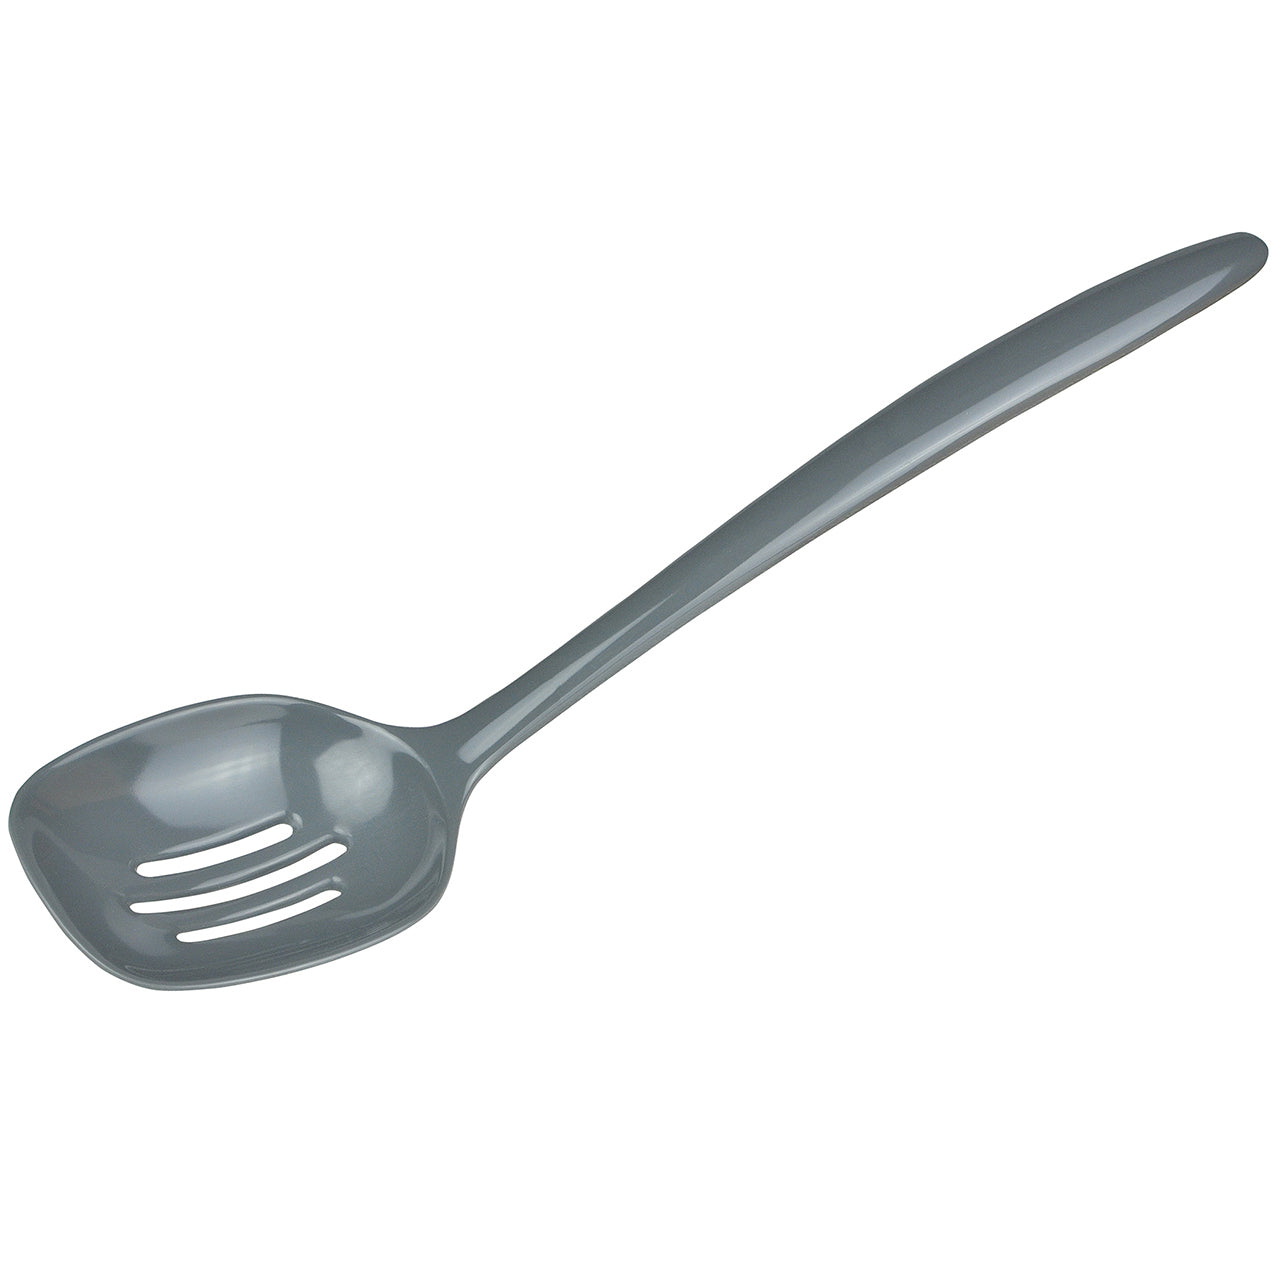 Gourmac 12" Malamine Slotted Spoon, Gray